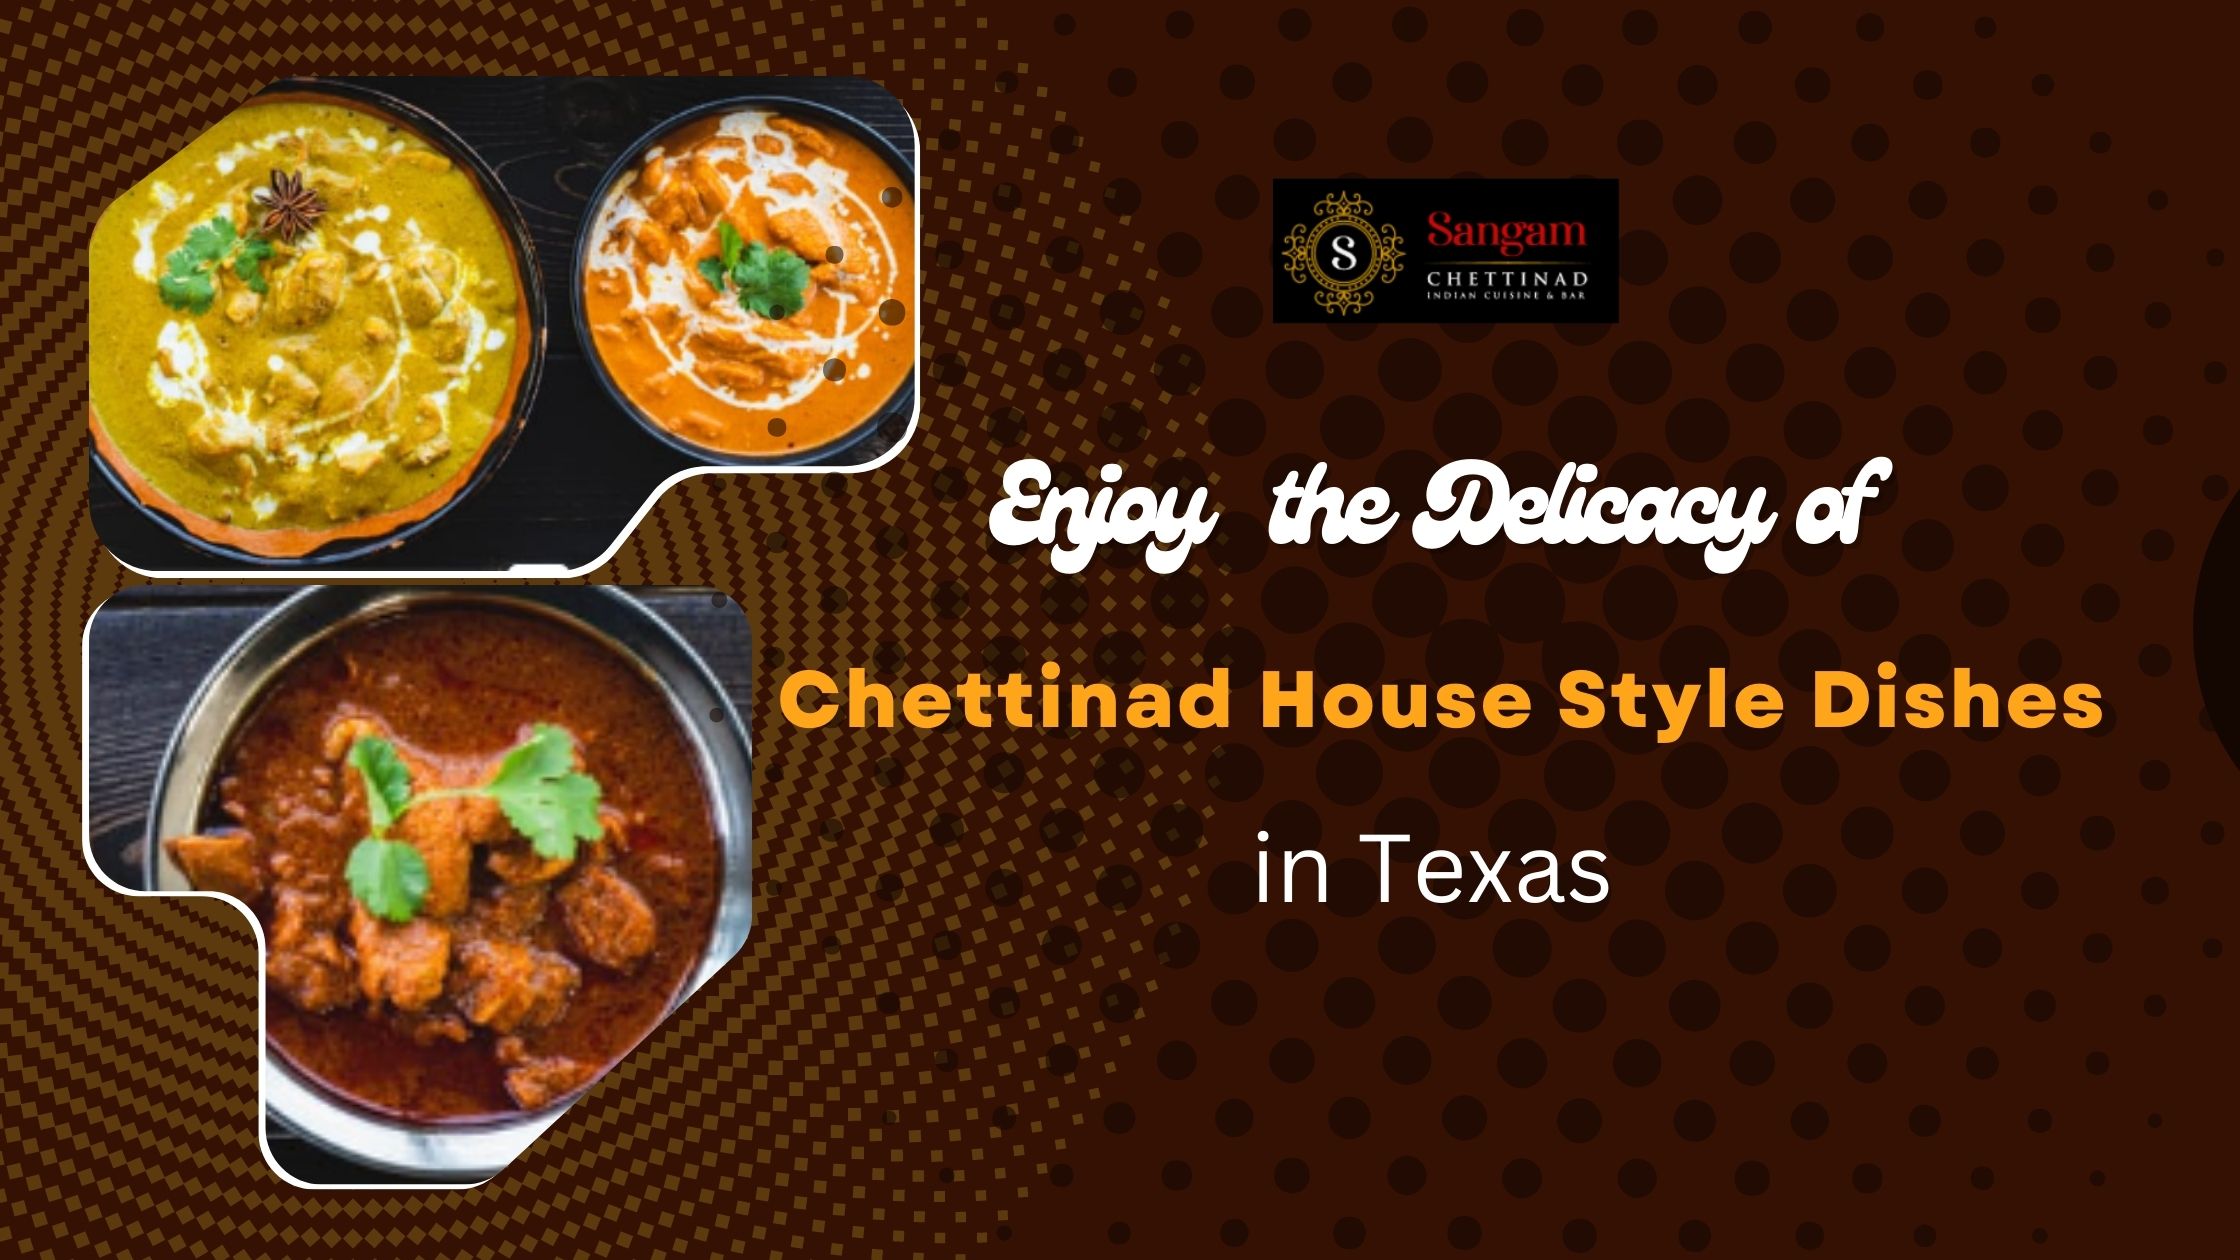 Enjoy the Delicacy of Chettinad House Style Dishes in Texas